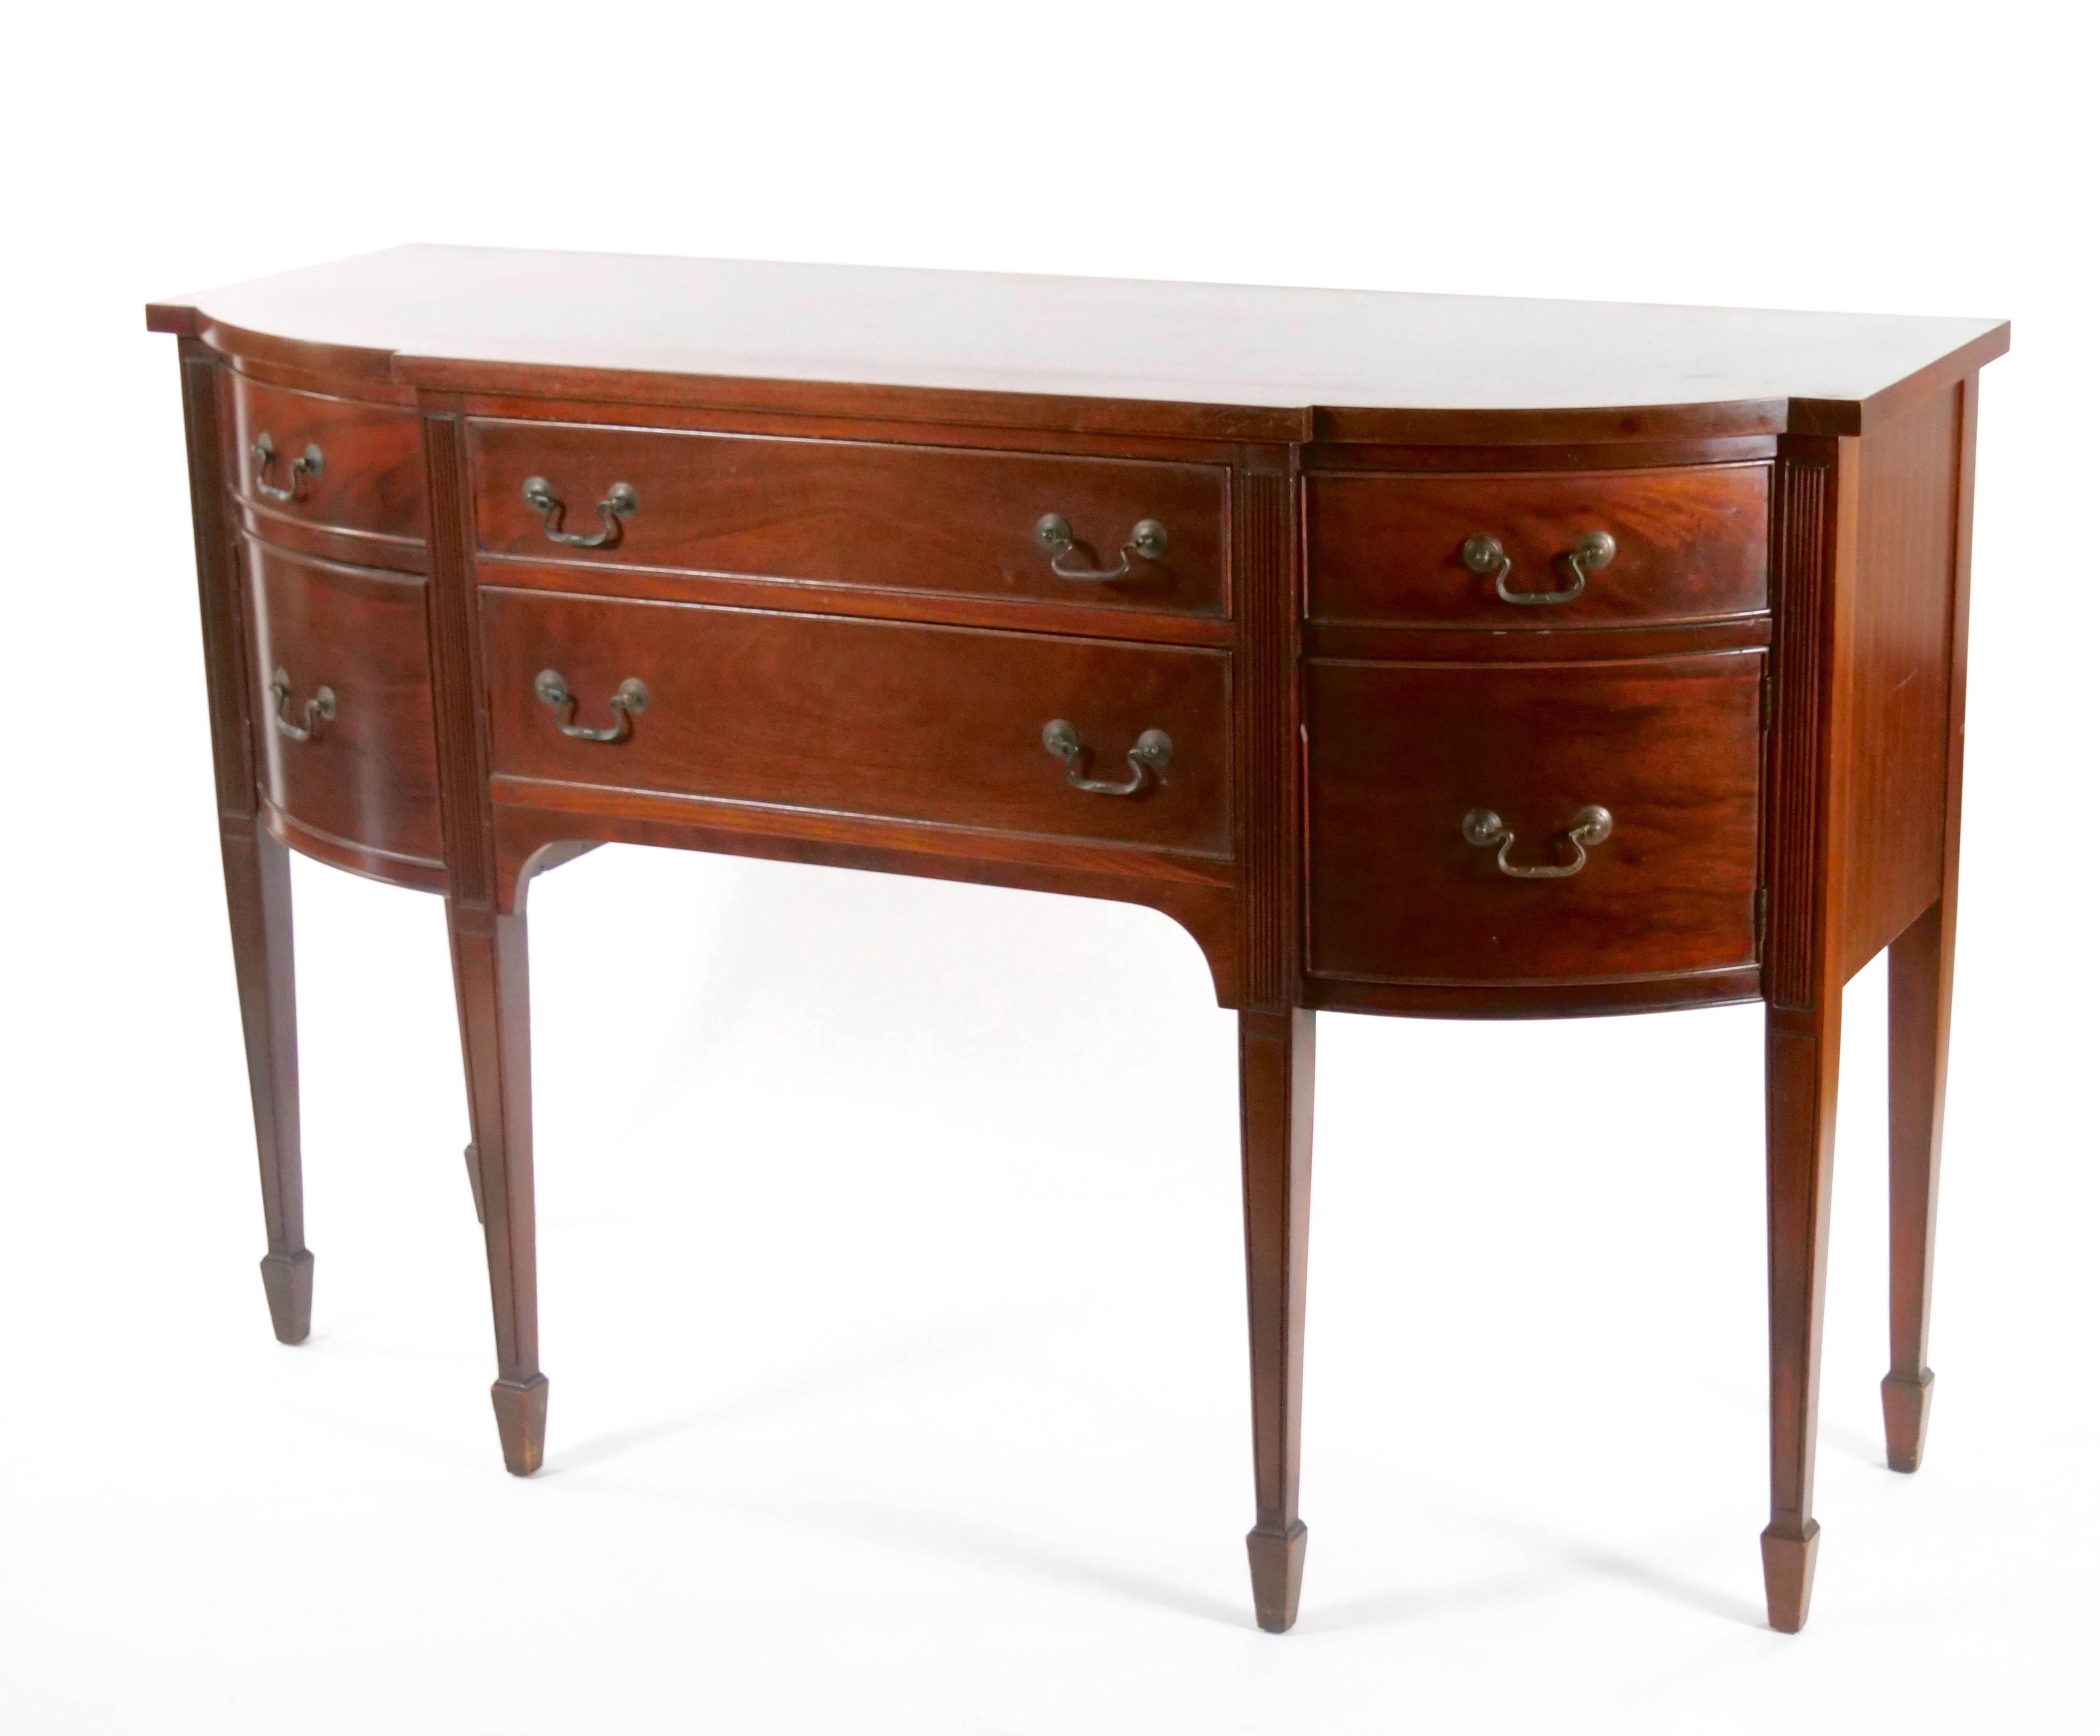 Hepplewhite 19th century Mahogany Wood Bow Front Buffet / Server  For Sale